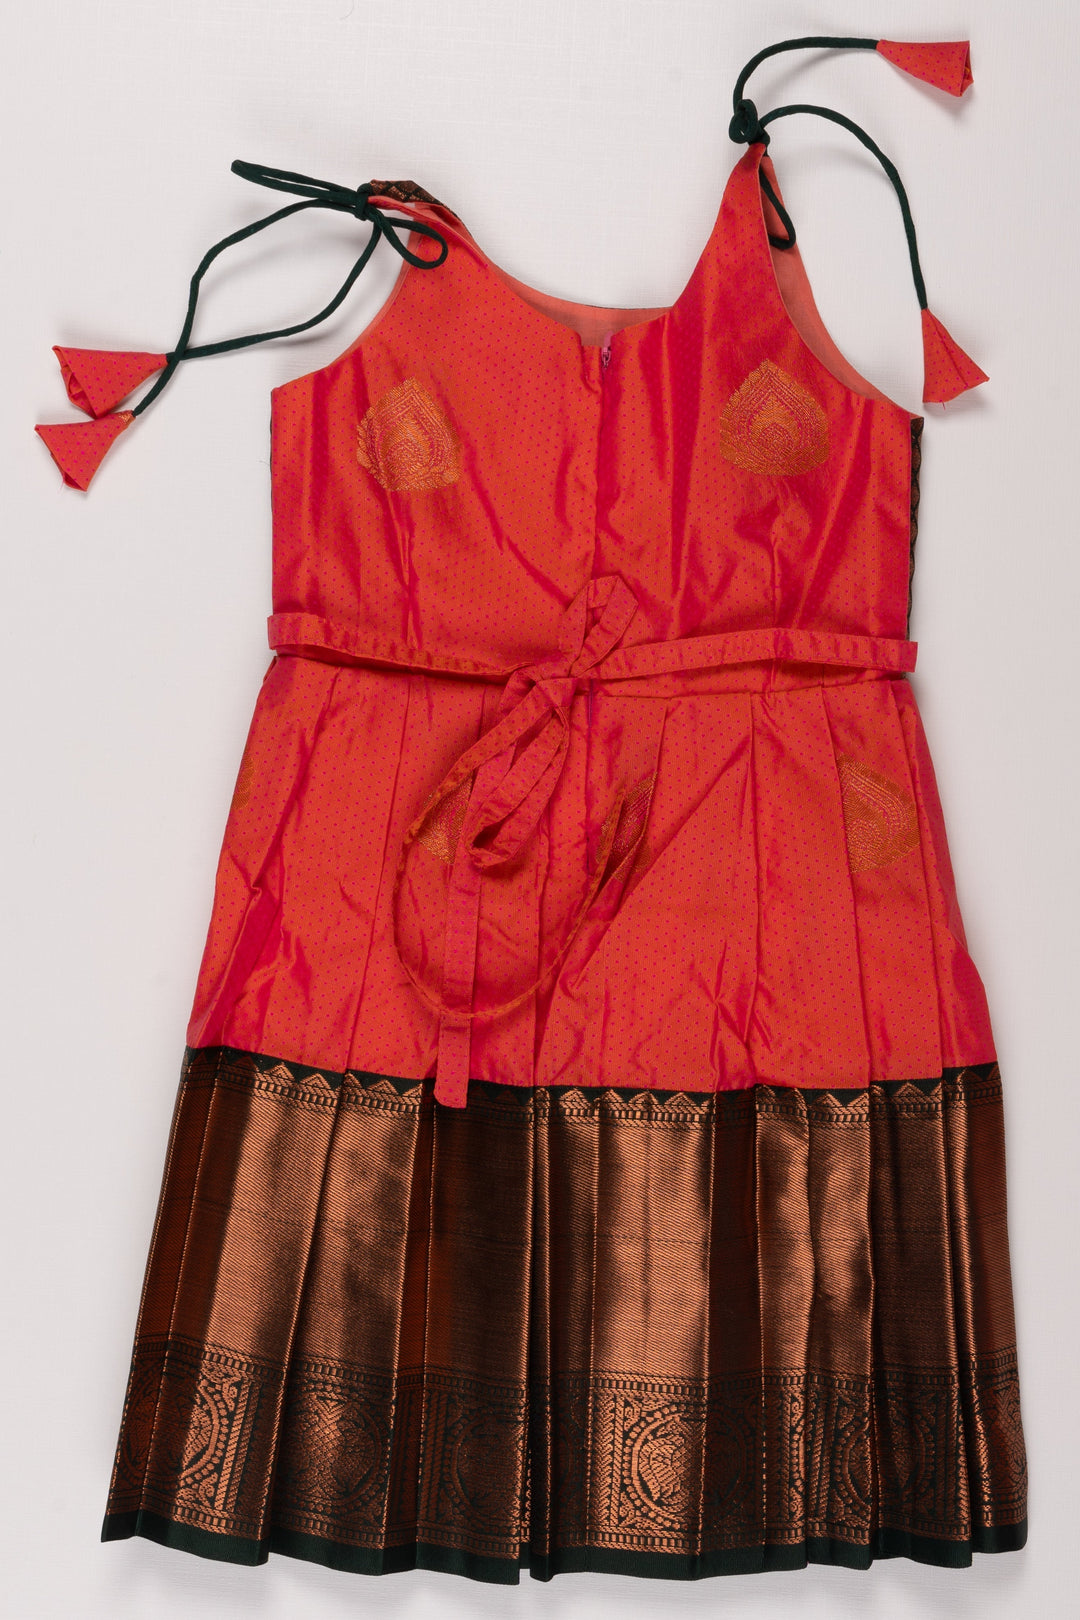 The Nesavu Tie Up Frock Scarlet Elegance Silk Frock with Chocolate Zari Weave and Tie-Up Detail Nesavu Scarlet Silk Frock for Girls with Chocolate Zari Hem | Bold and Traditional | The Nesavu